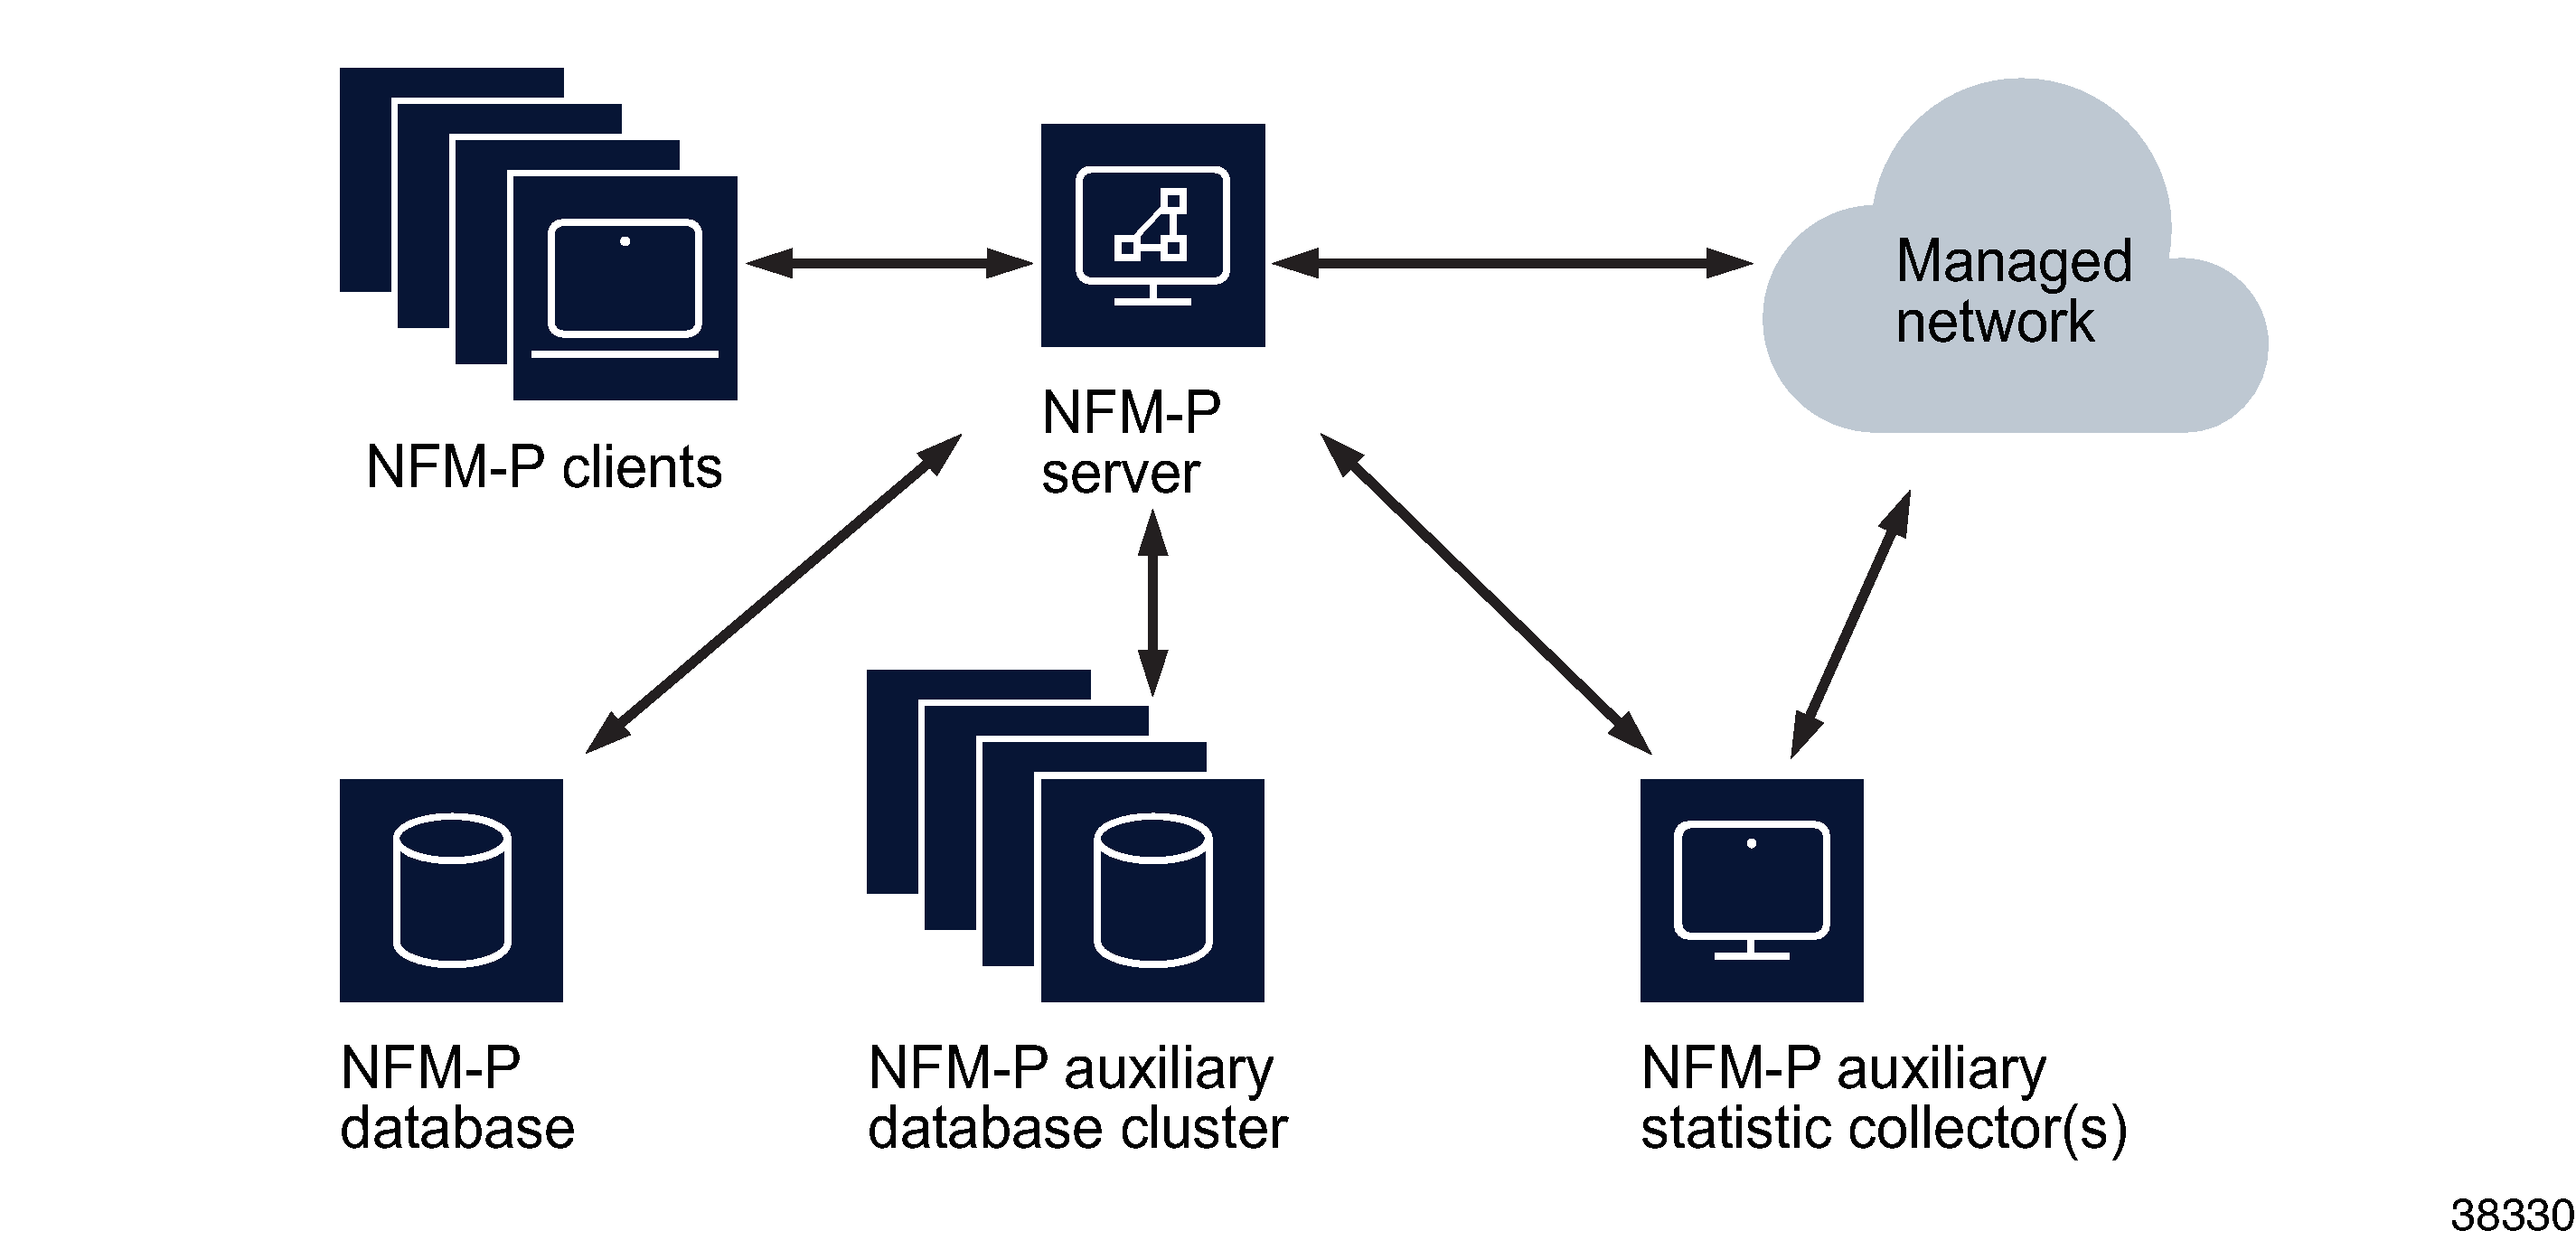 NFM-P standalone deployment - distributed NFM-P server and NFM-P database configuration and NFM-P auxiliary servers with statistics collection using the NFM-P auxiliary database